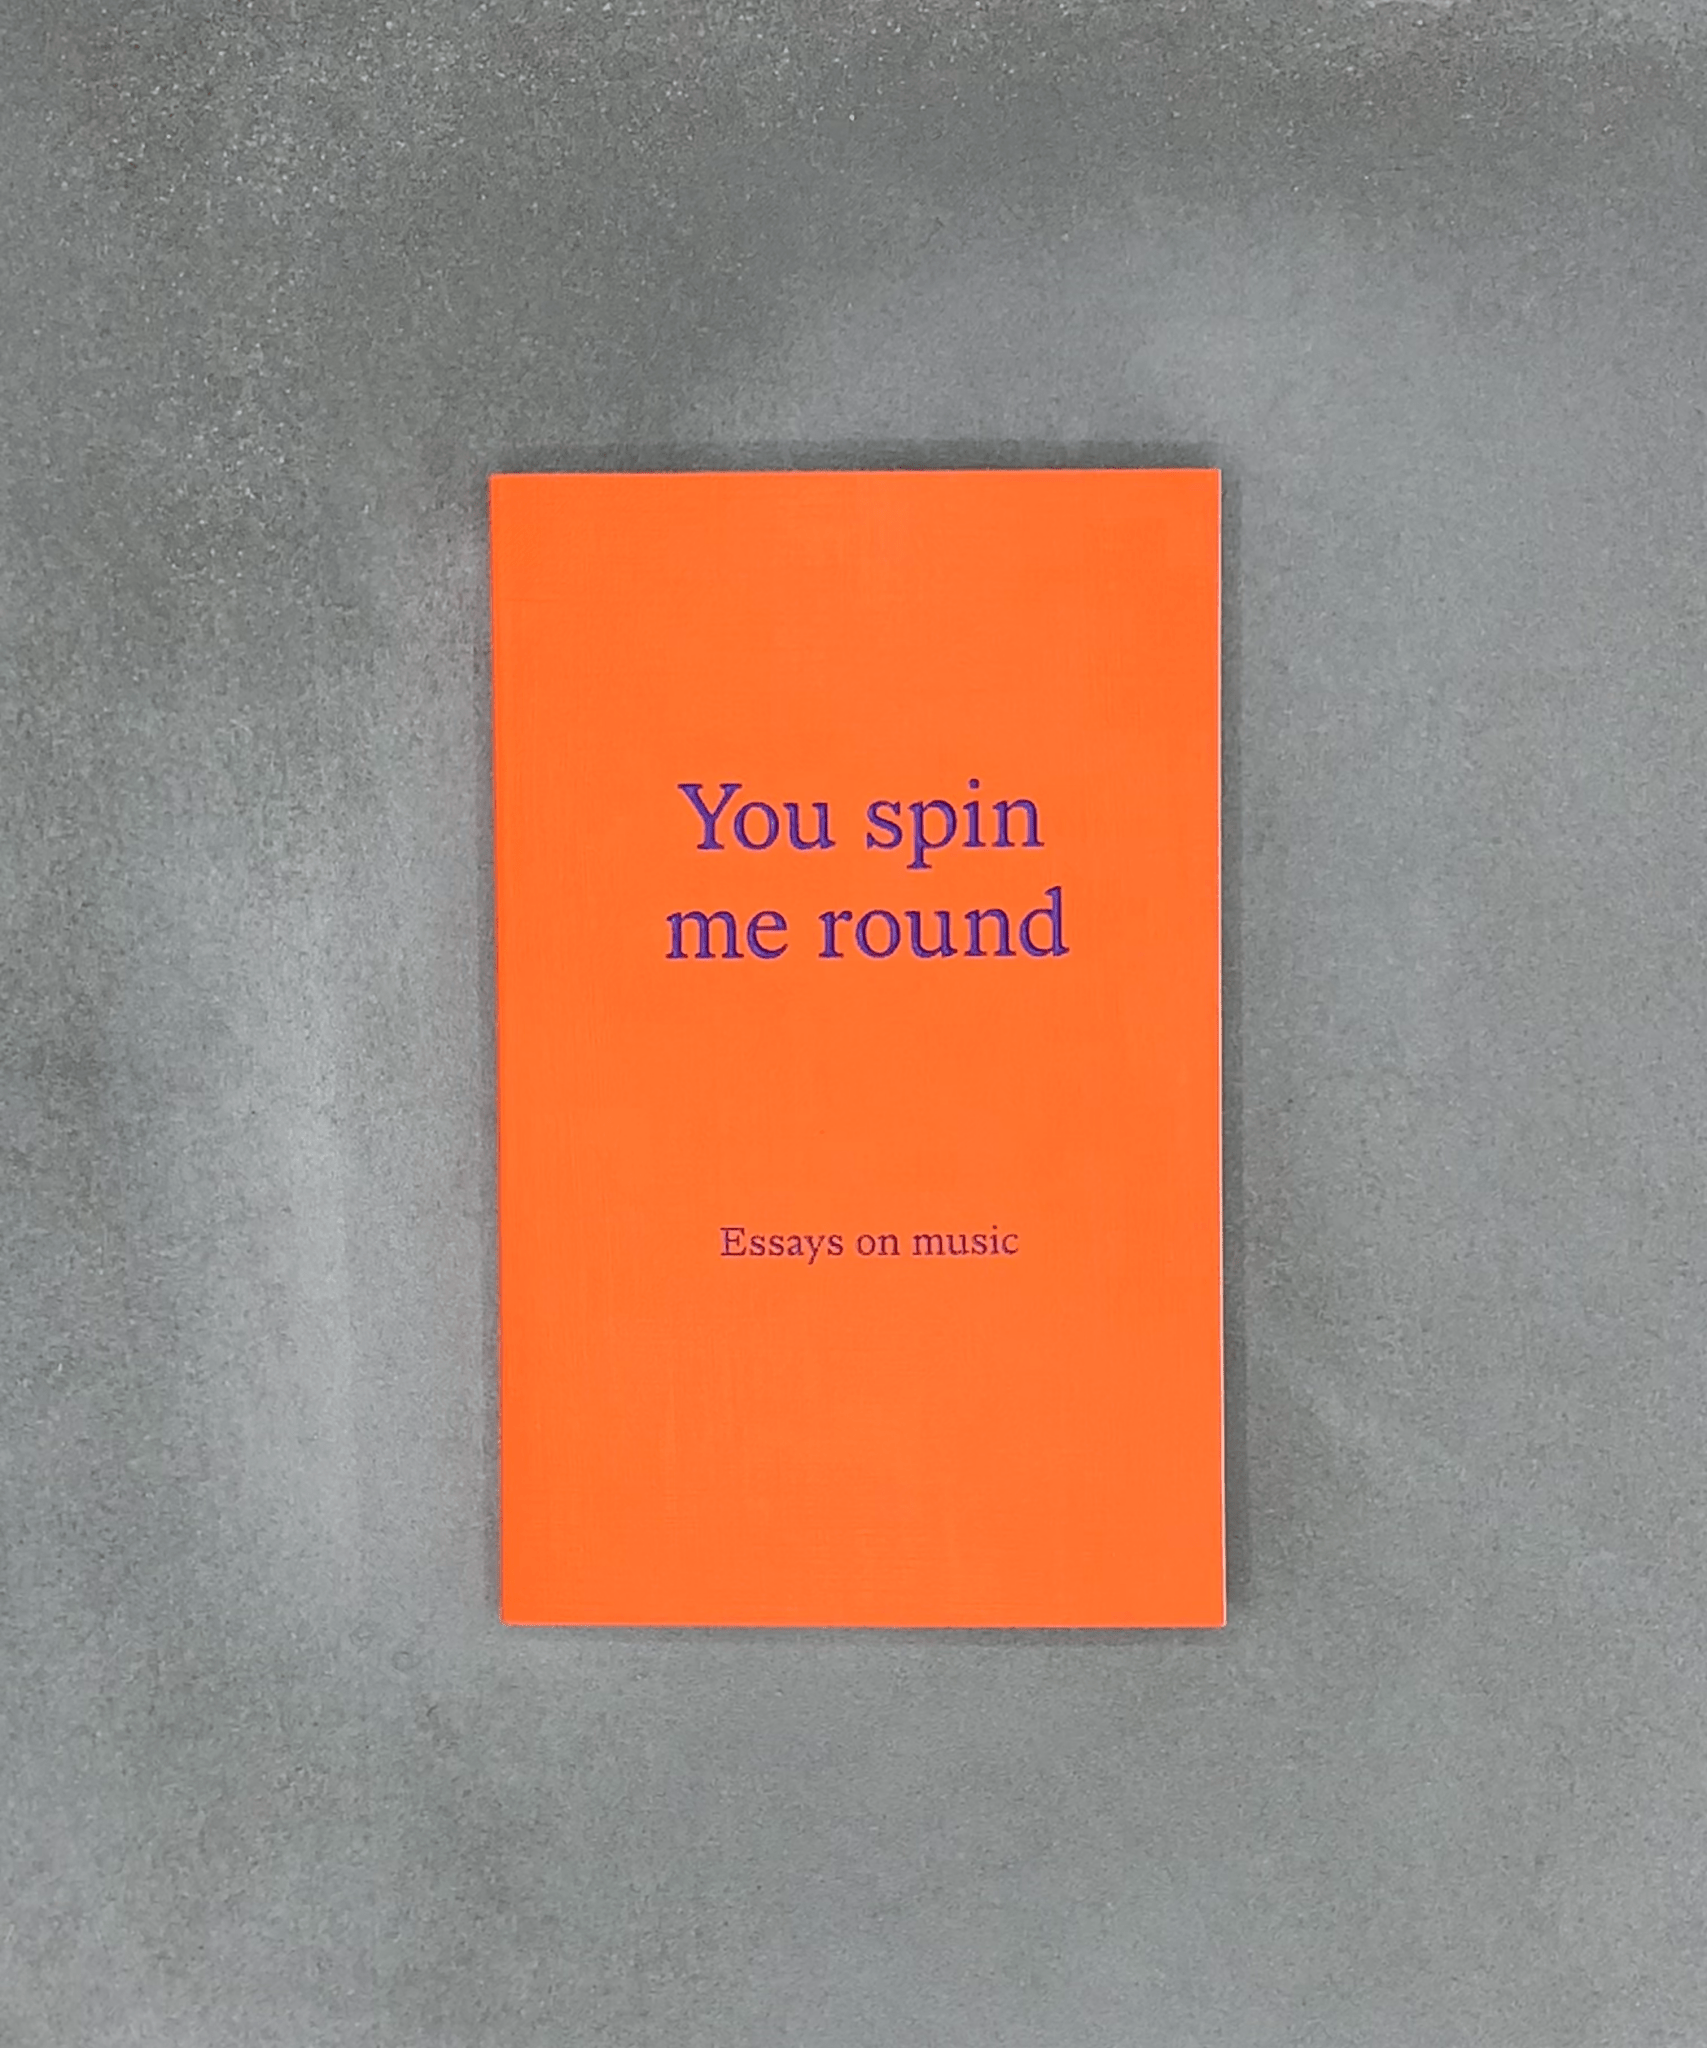 You spin me round: Essays on music - and Sydney Weinberg. - Brian Dillon - Aingeala Flannery - TACO! - PVA Books